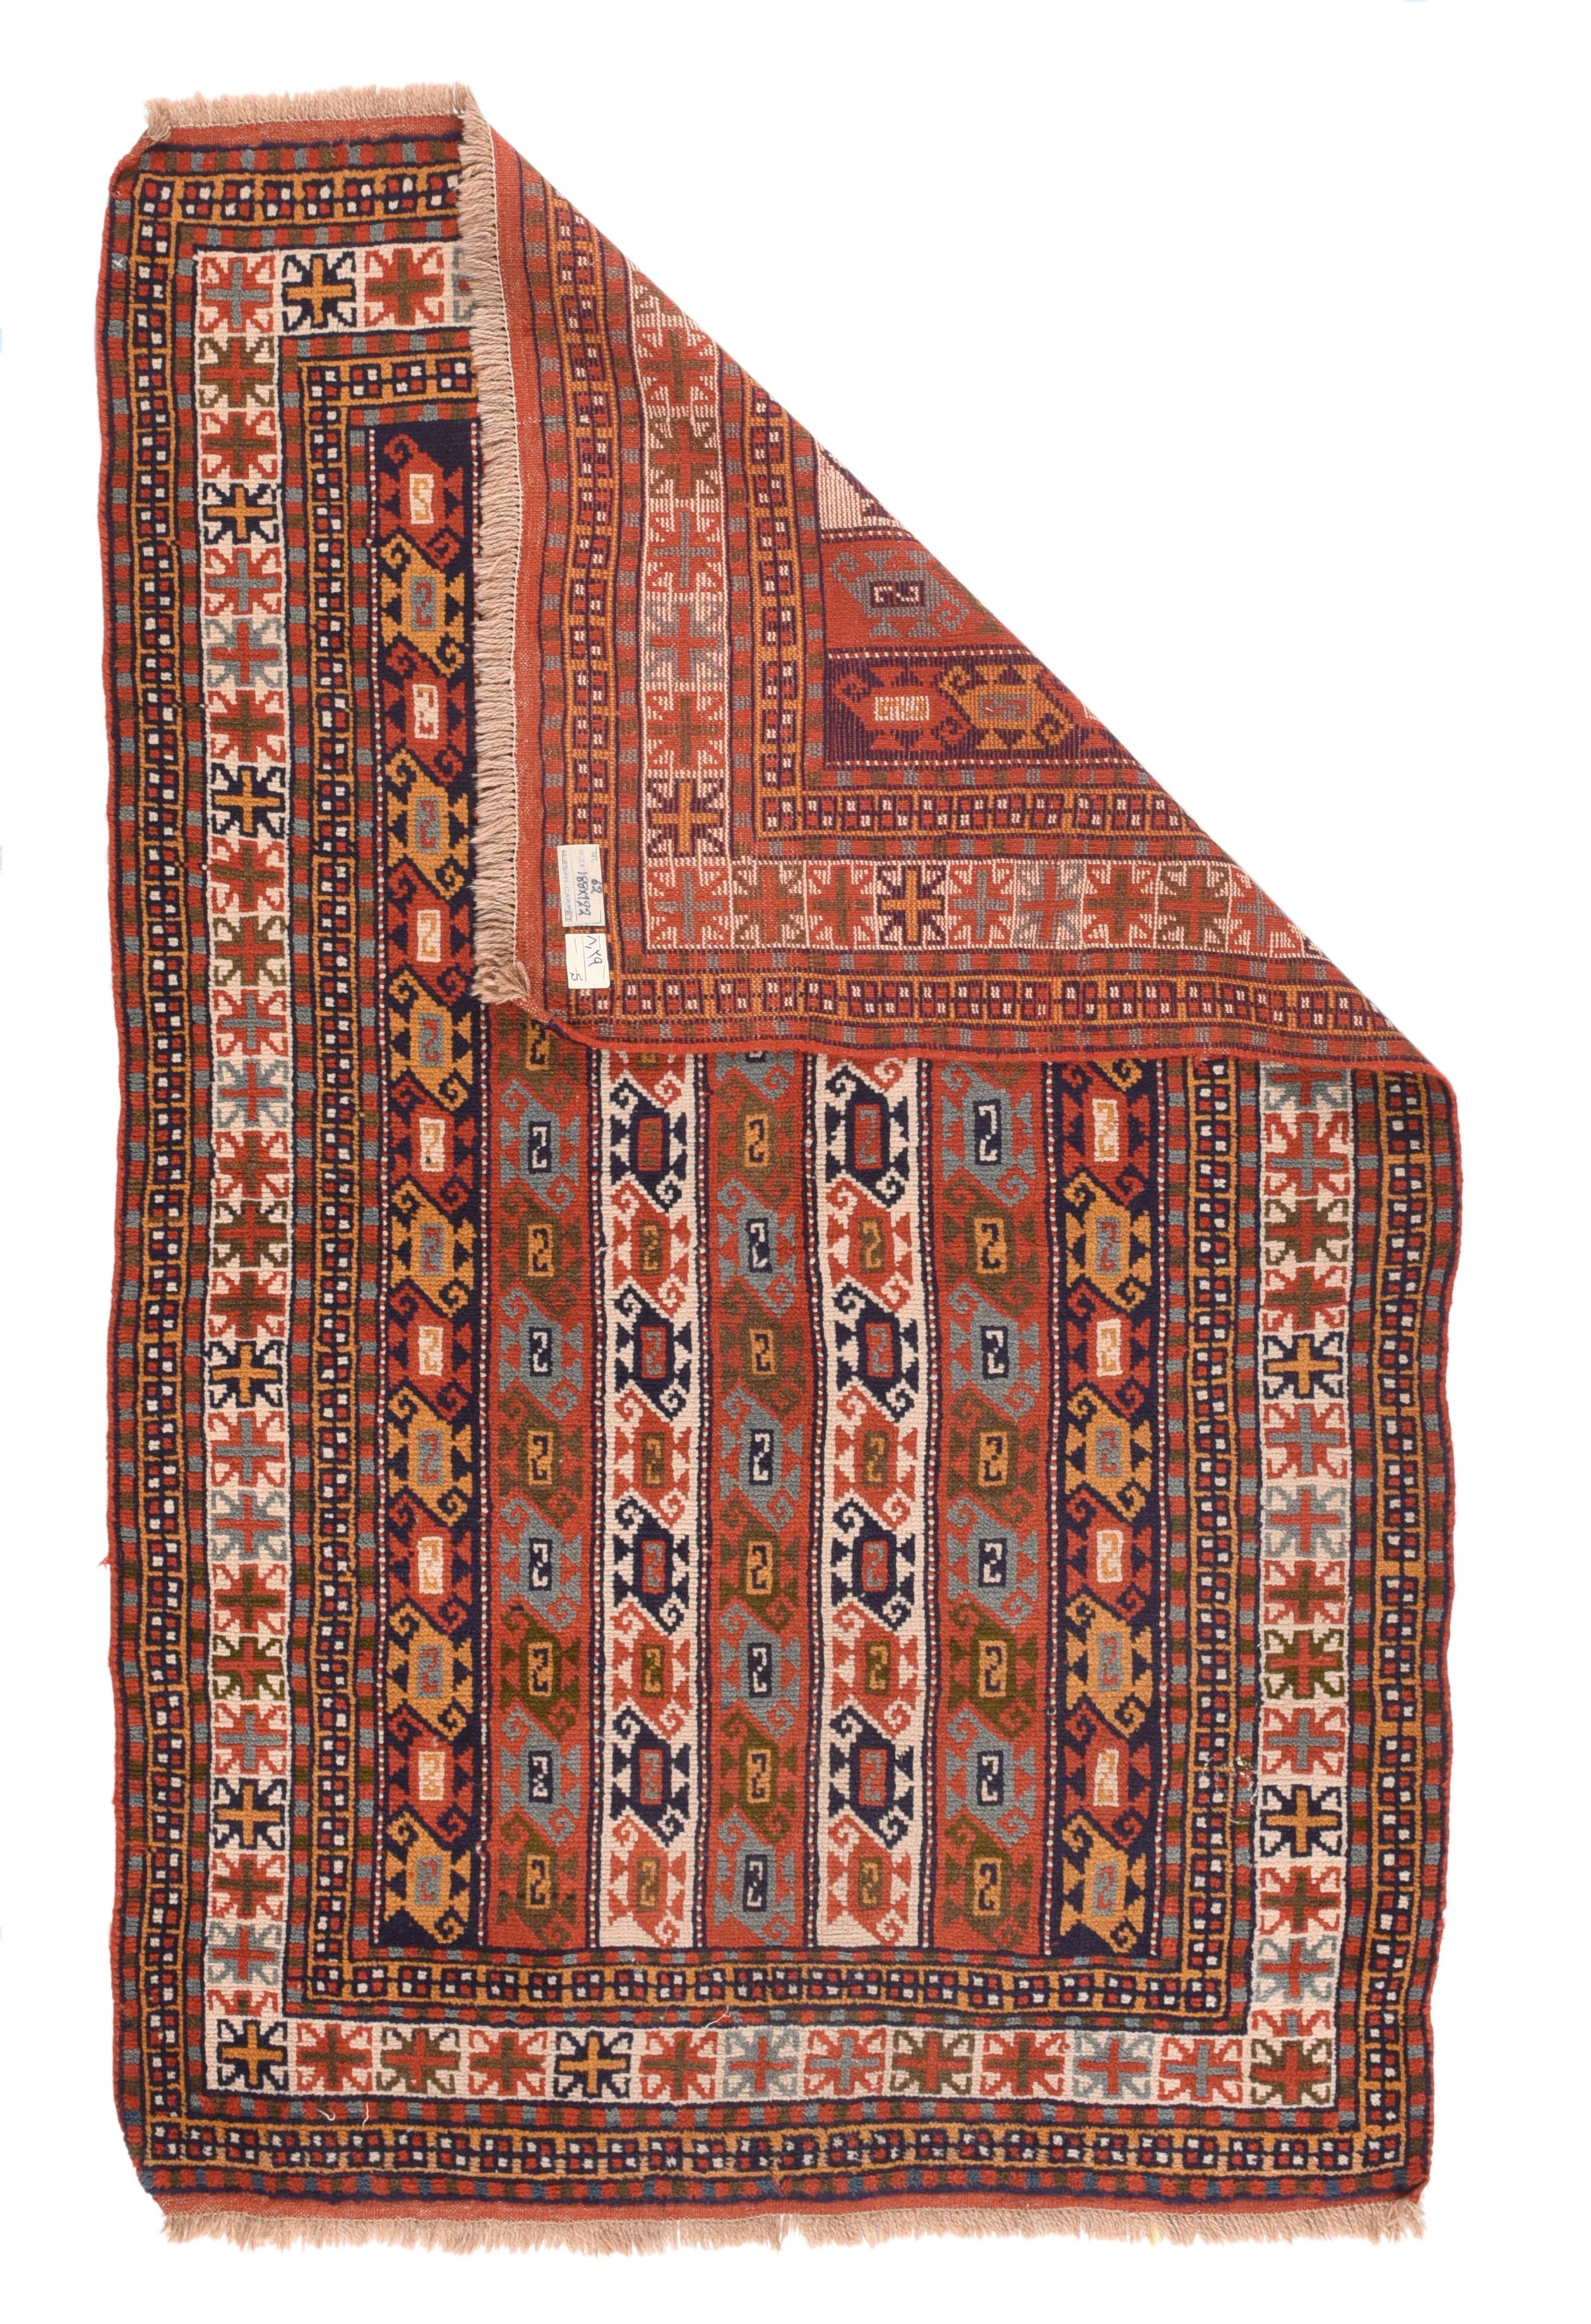 Vintage Kazak Rug 4' x 6'3''. Not a Kazak, but from the Kurds in NE Persia, with their totally characteristic border system, and with a vertical stripe design in rust-red, navy and cream featuring S-shaped double end botehs. Narrow flat woven end